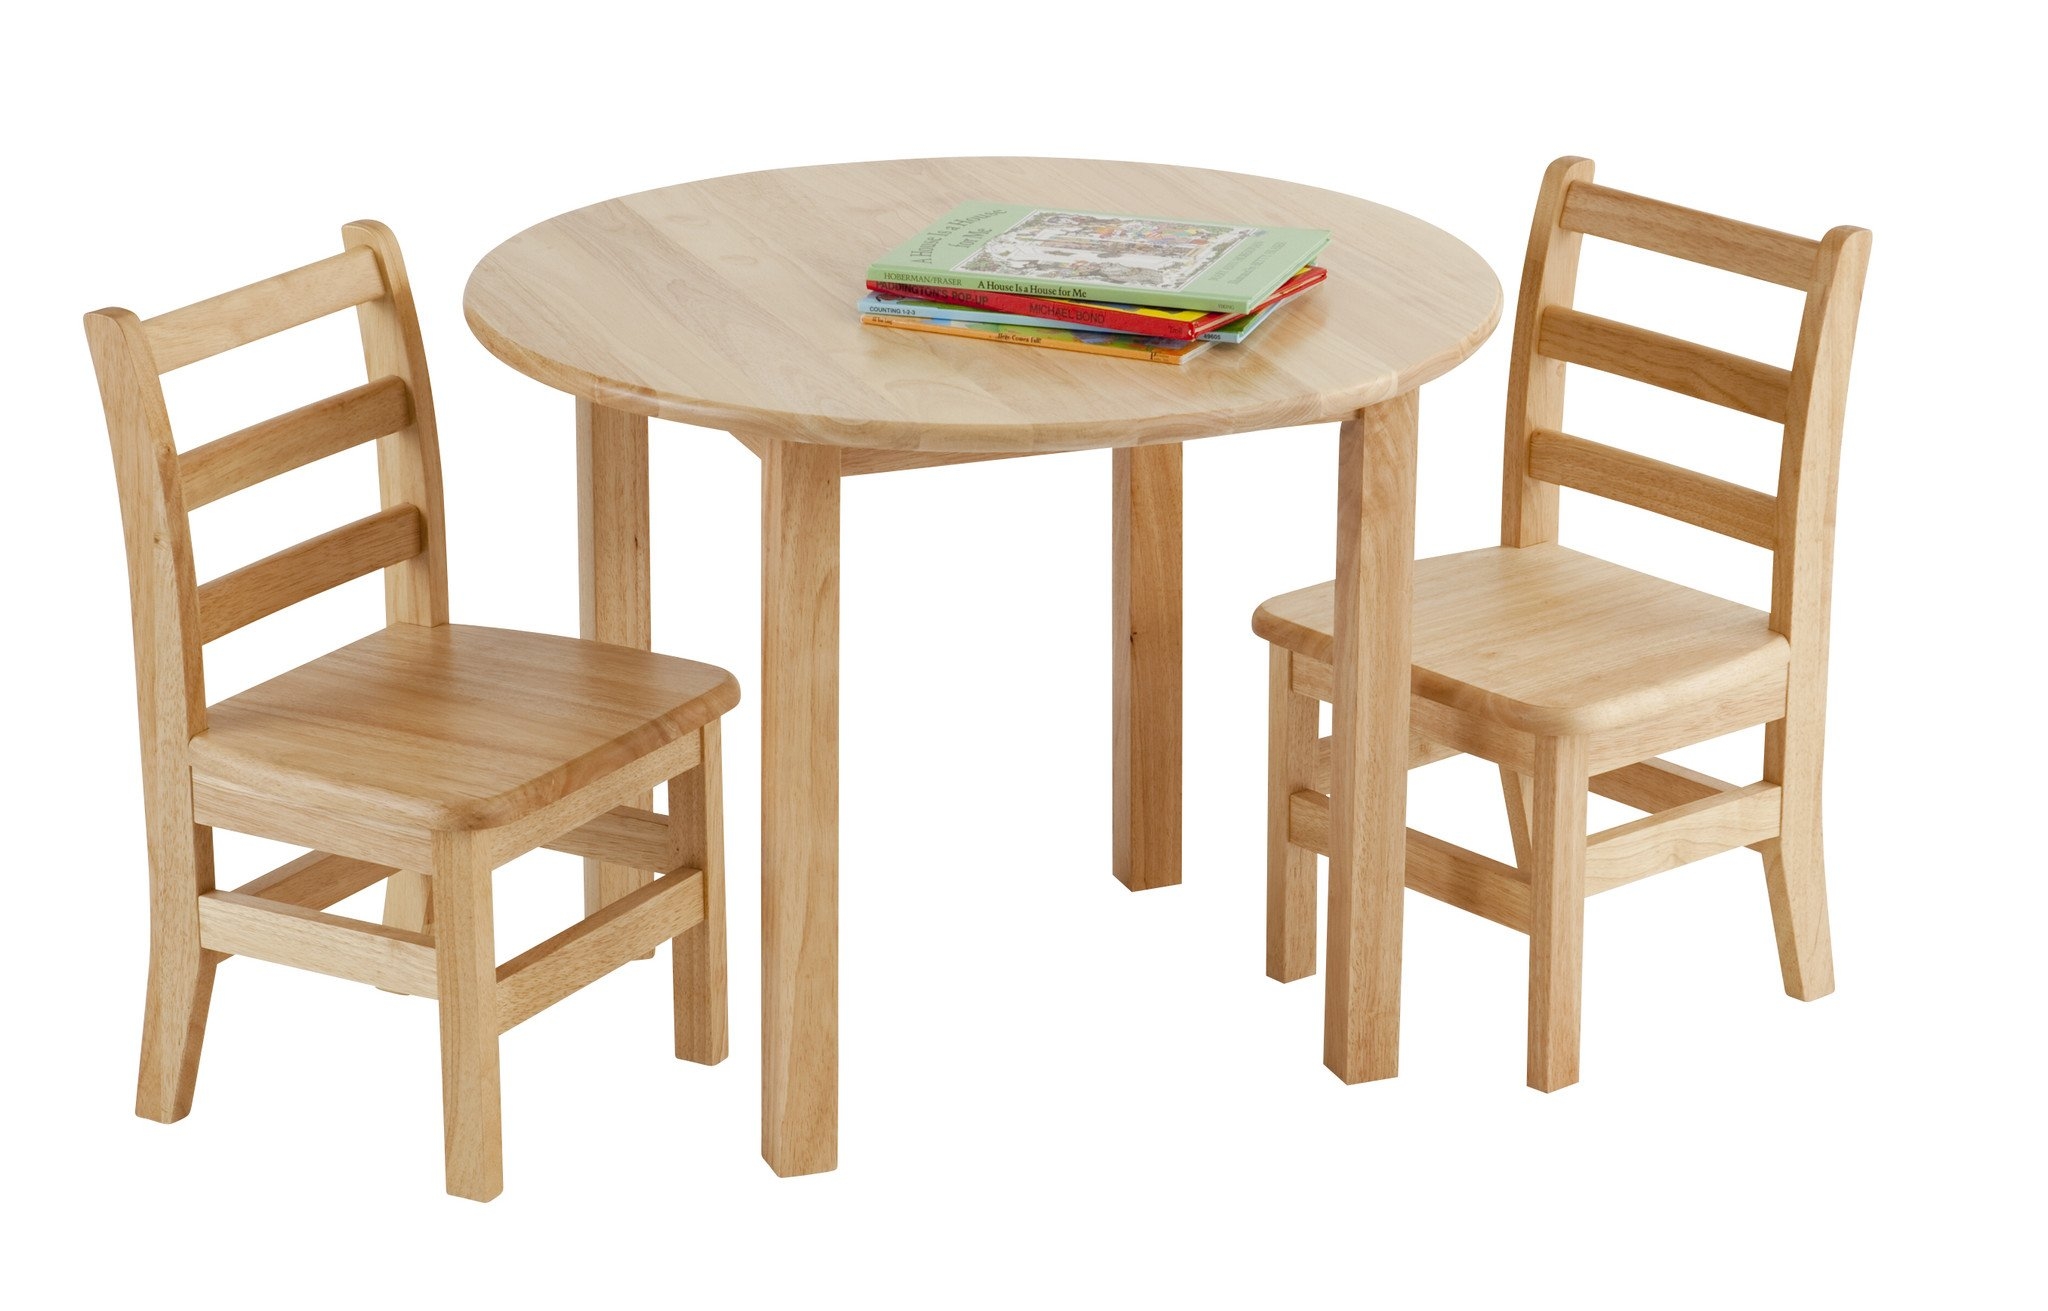 ECR4Kids 30" x 30" x 22" Round Wood Table with Chair, Set of 3